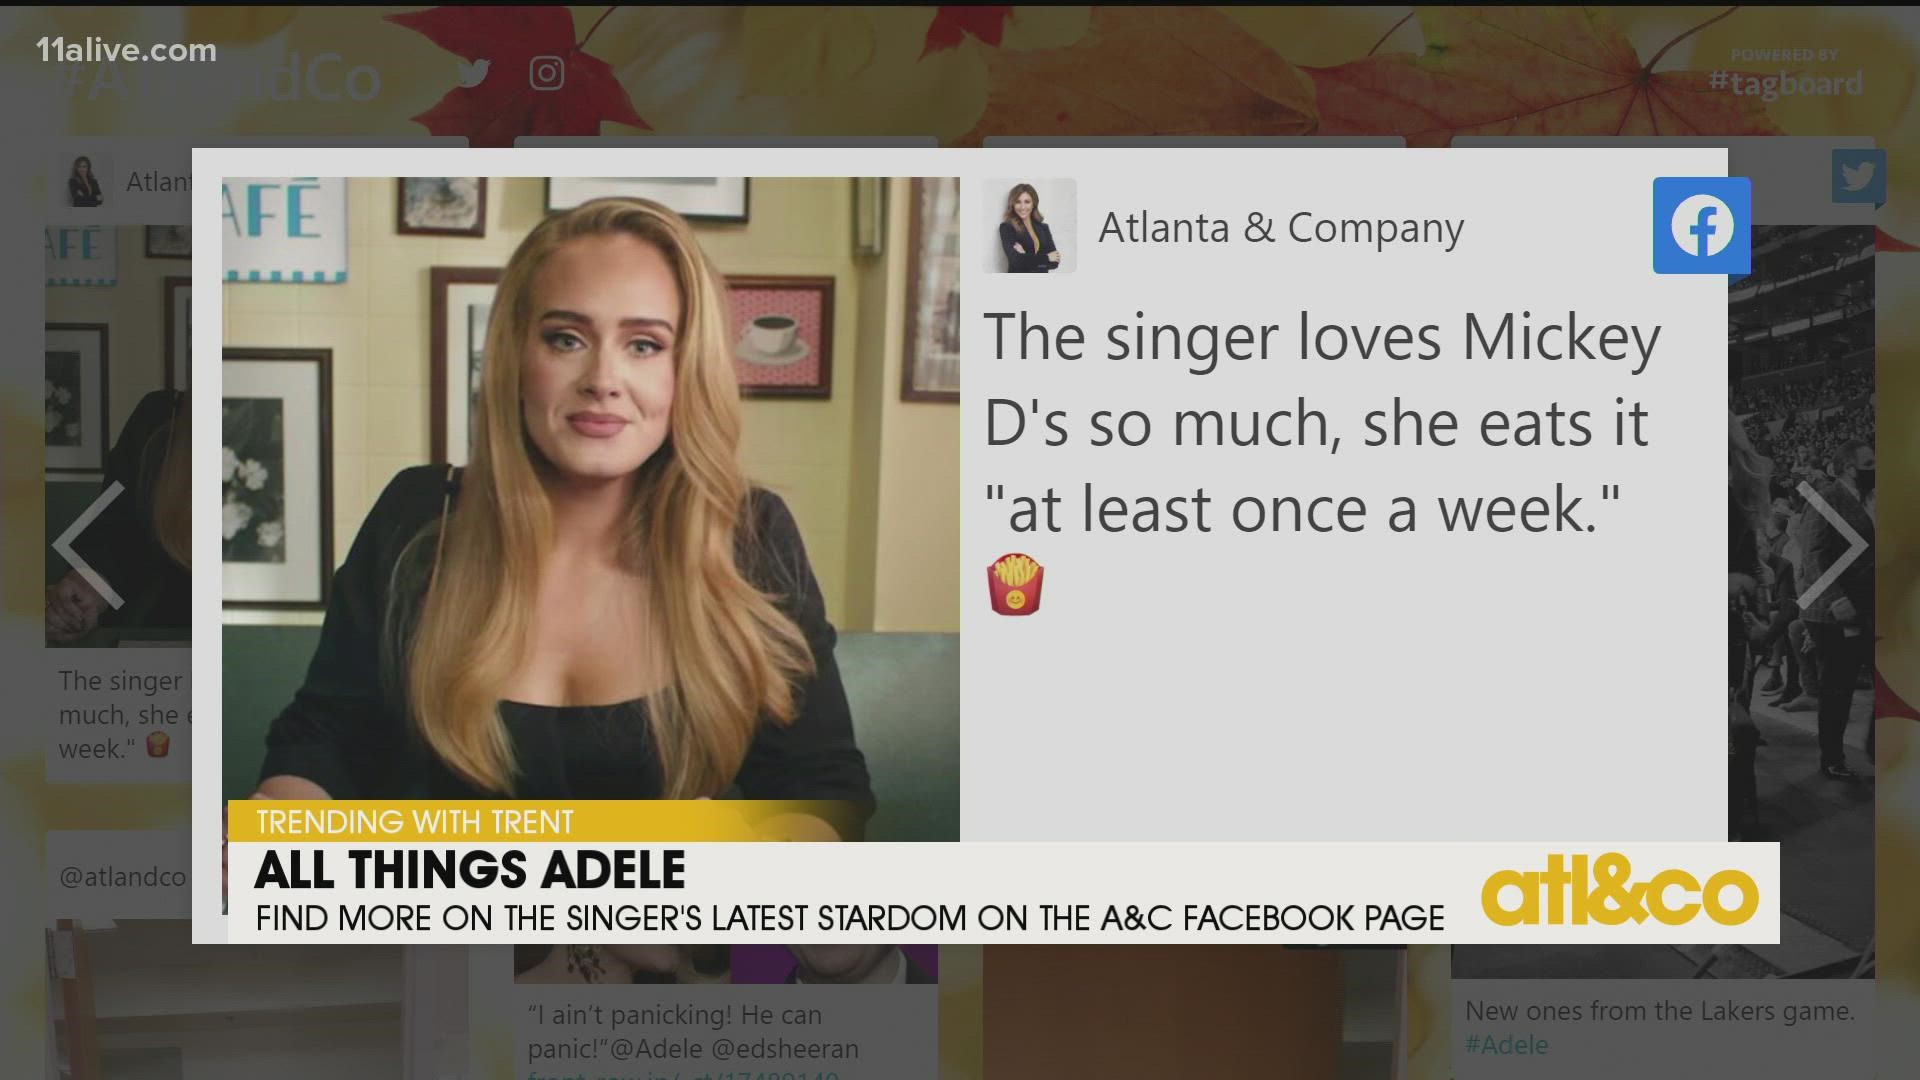 Let's take a look at Adele's latest pop culture stardom on the charts and beyond.